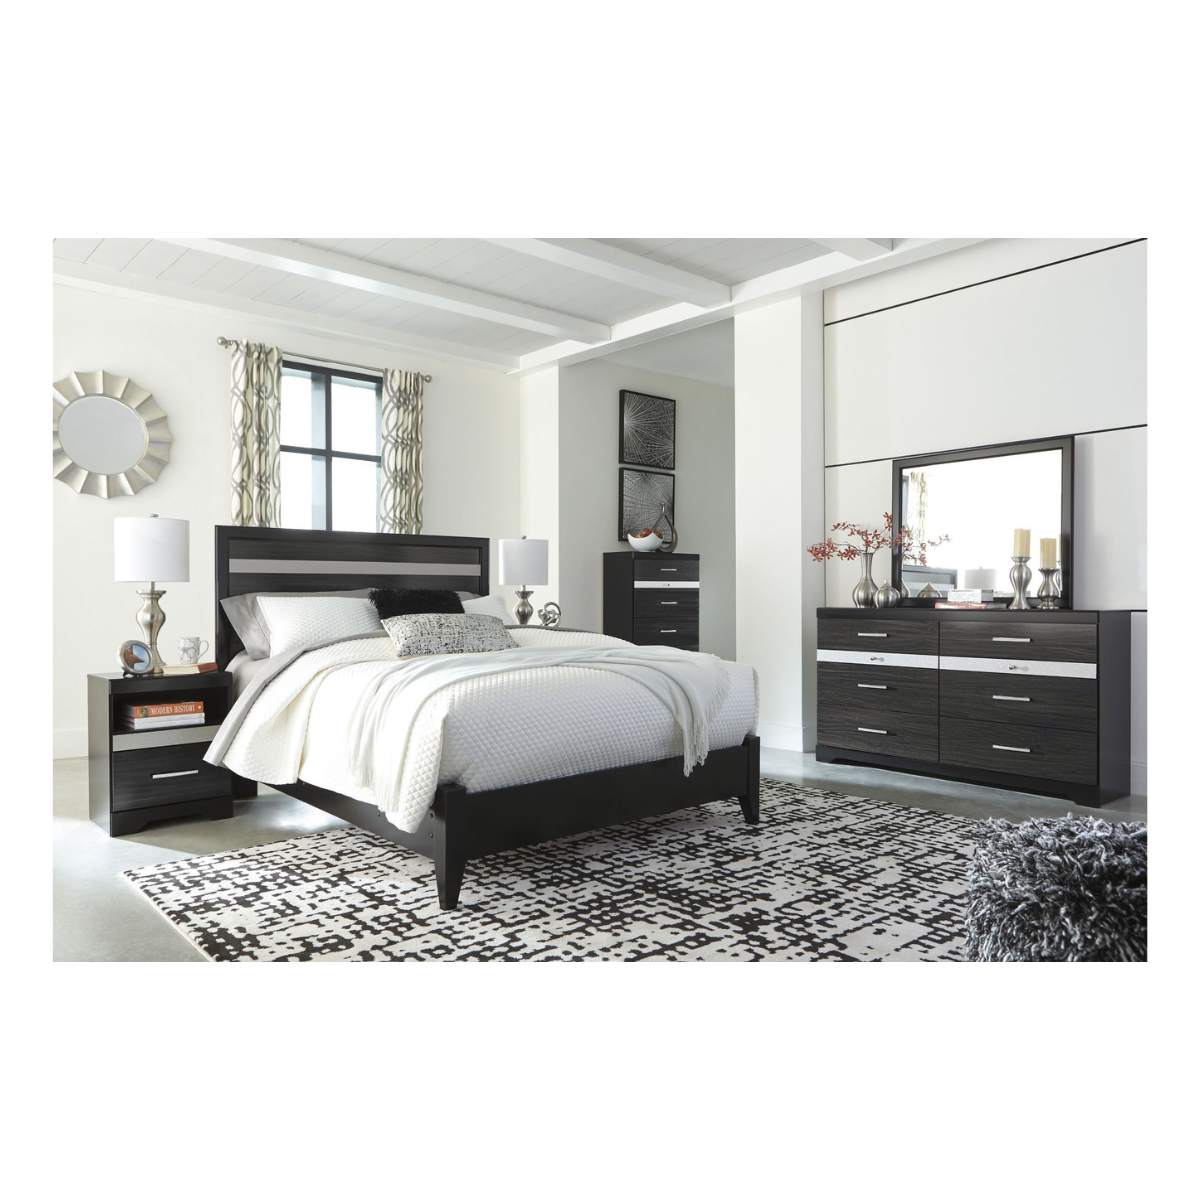 Ashley Starberry Queen Bedroom Group 6-piece B304 $1389.00 90 Days Same as Cash*